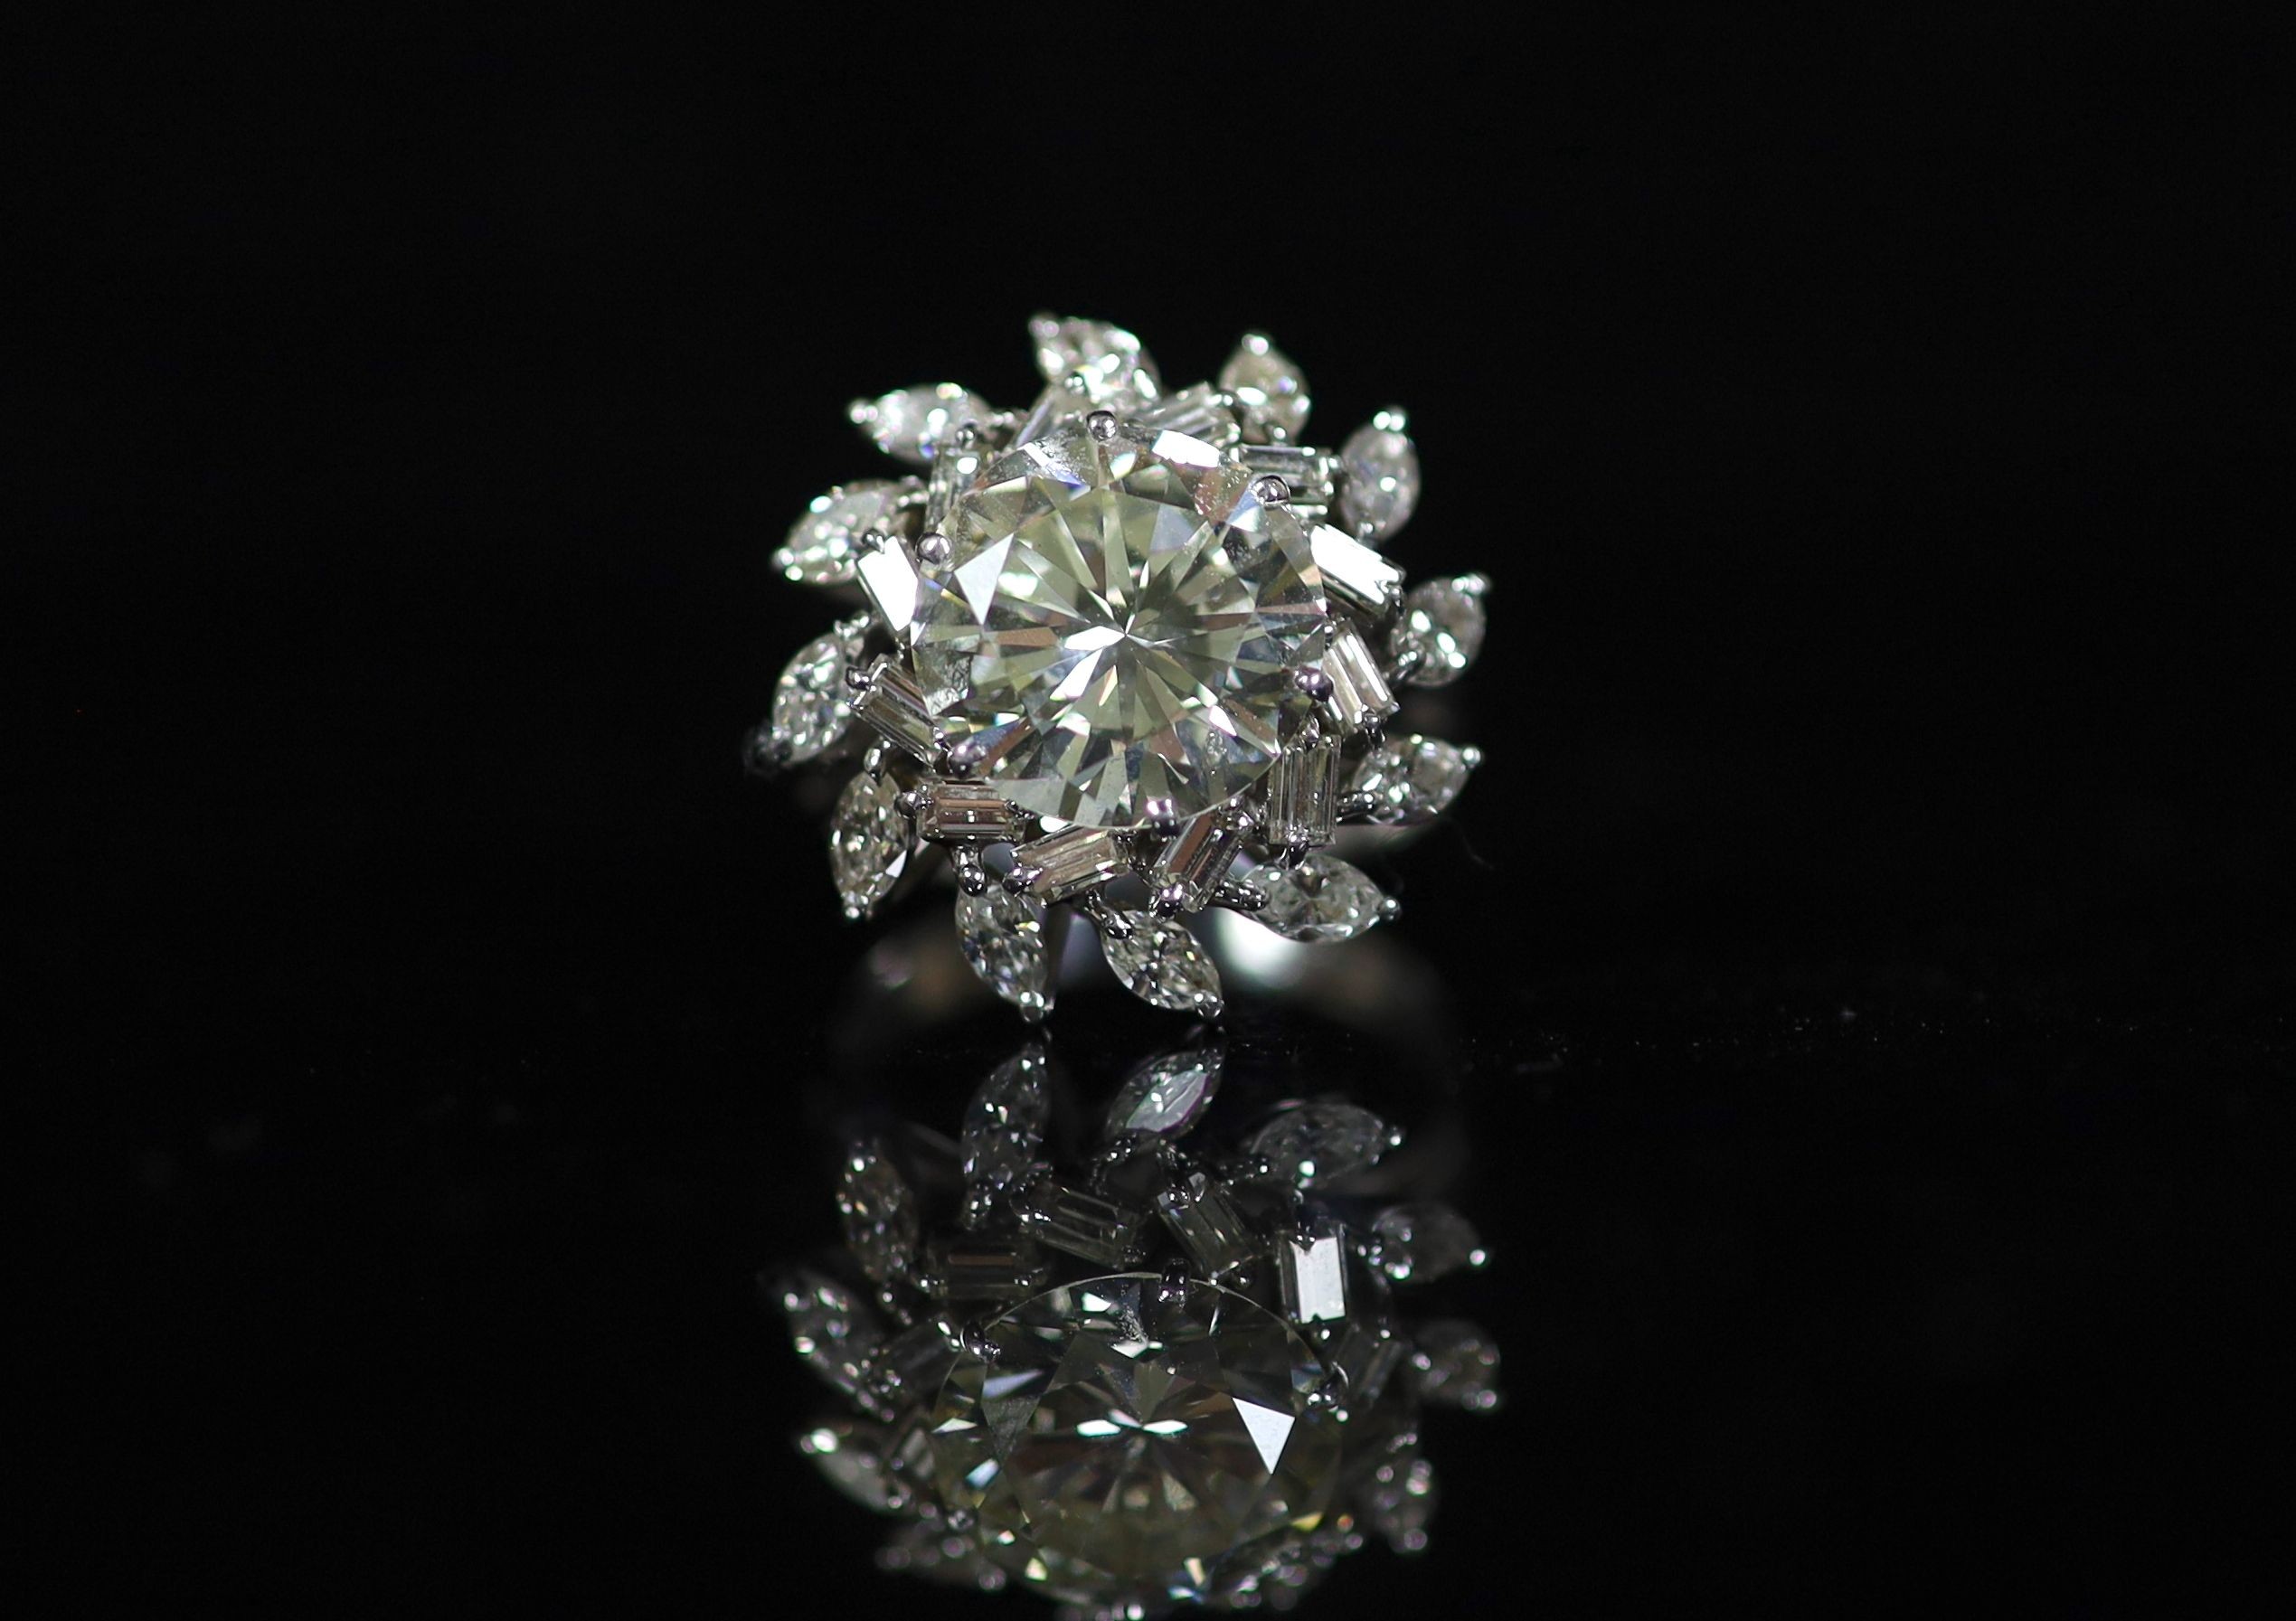 A platinum and single stone diamond ring, with baguette and marquise cut diamond foliate setting